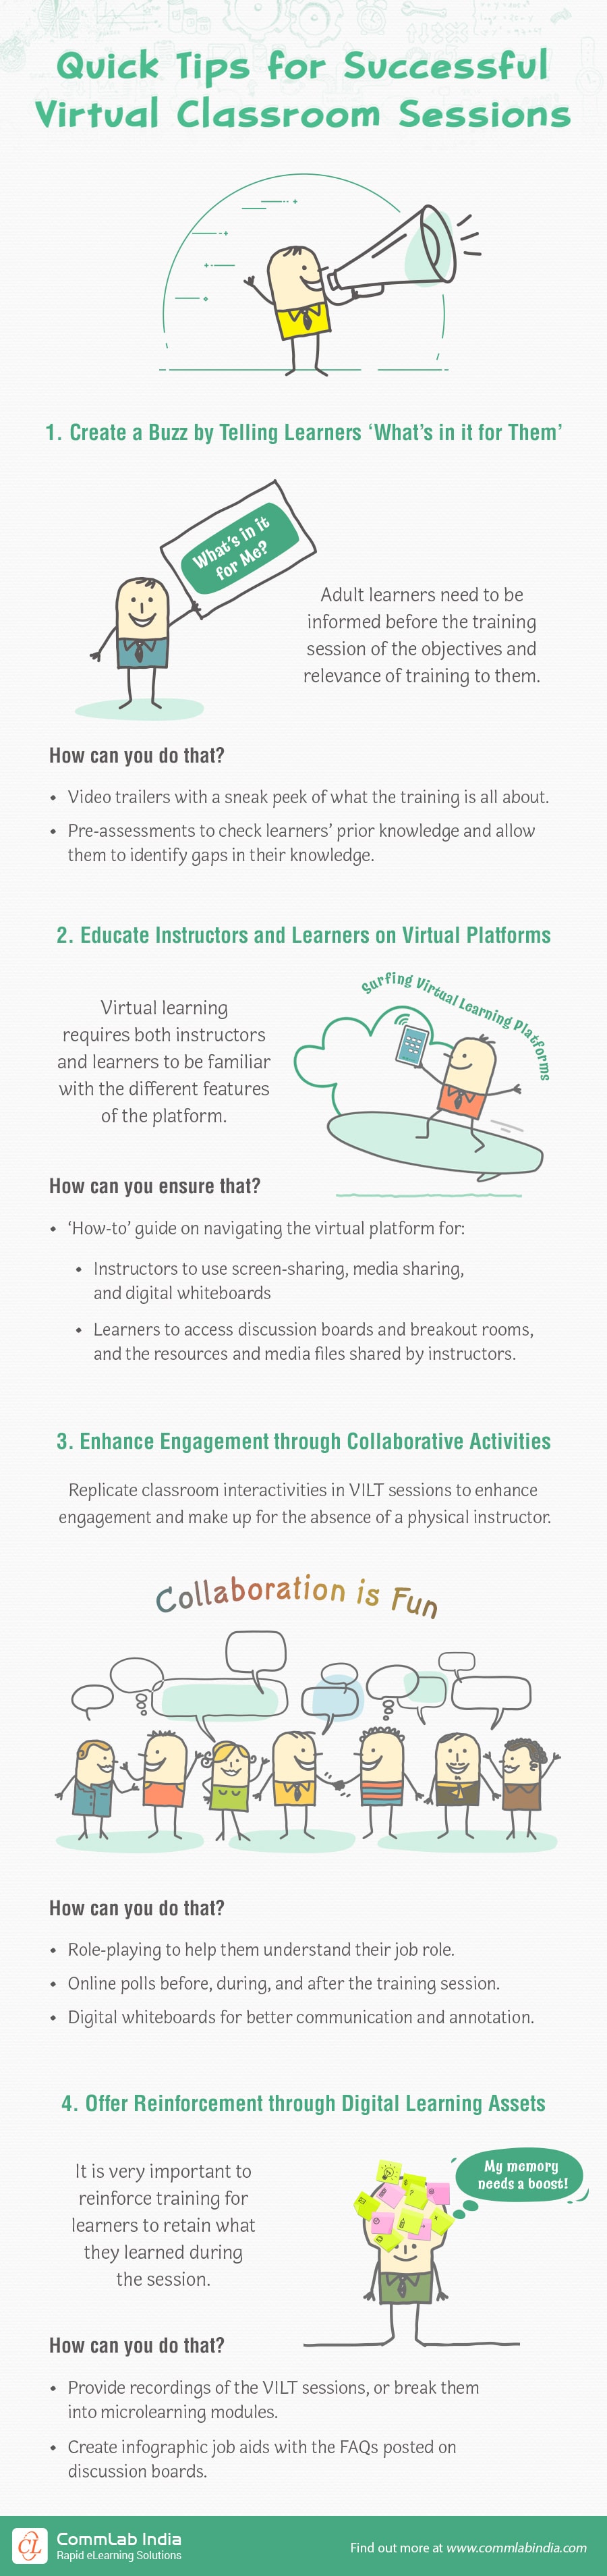 Virtual Classroom: Quick Tips for Getting it Right!